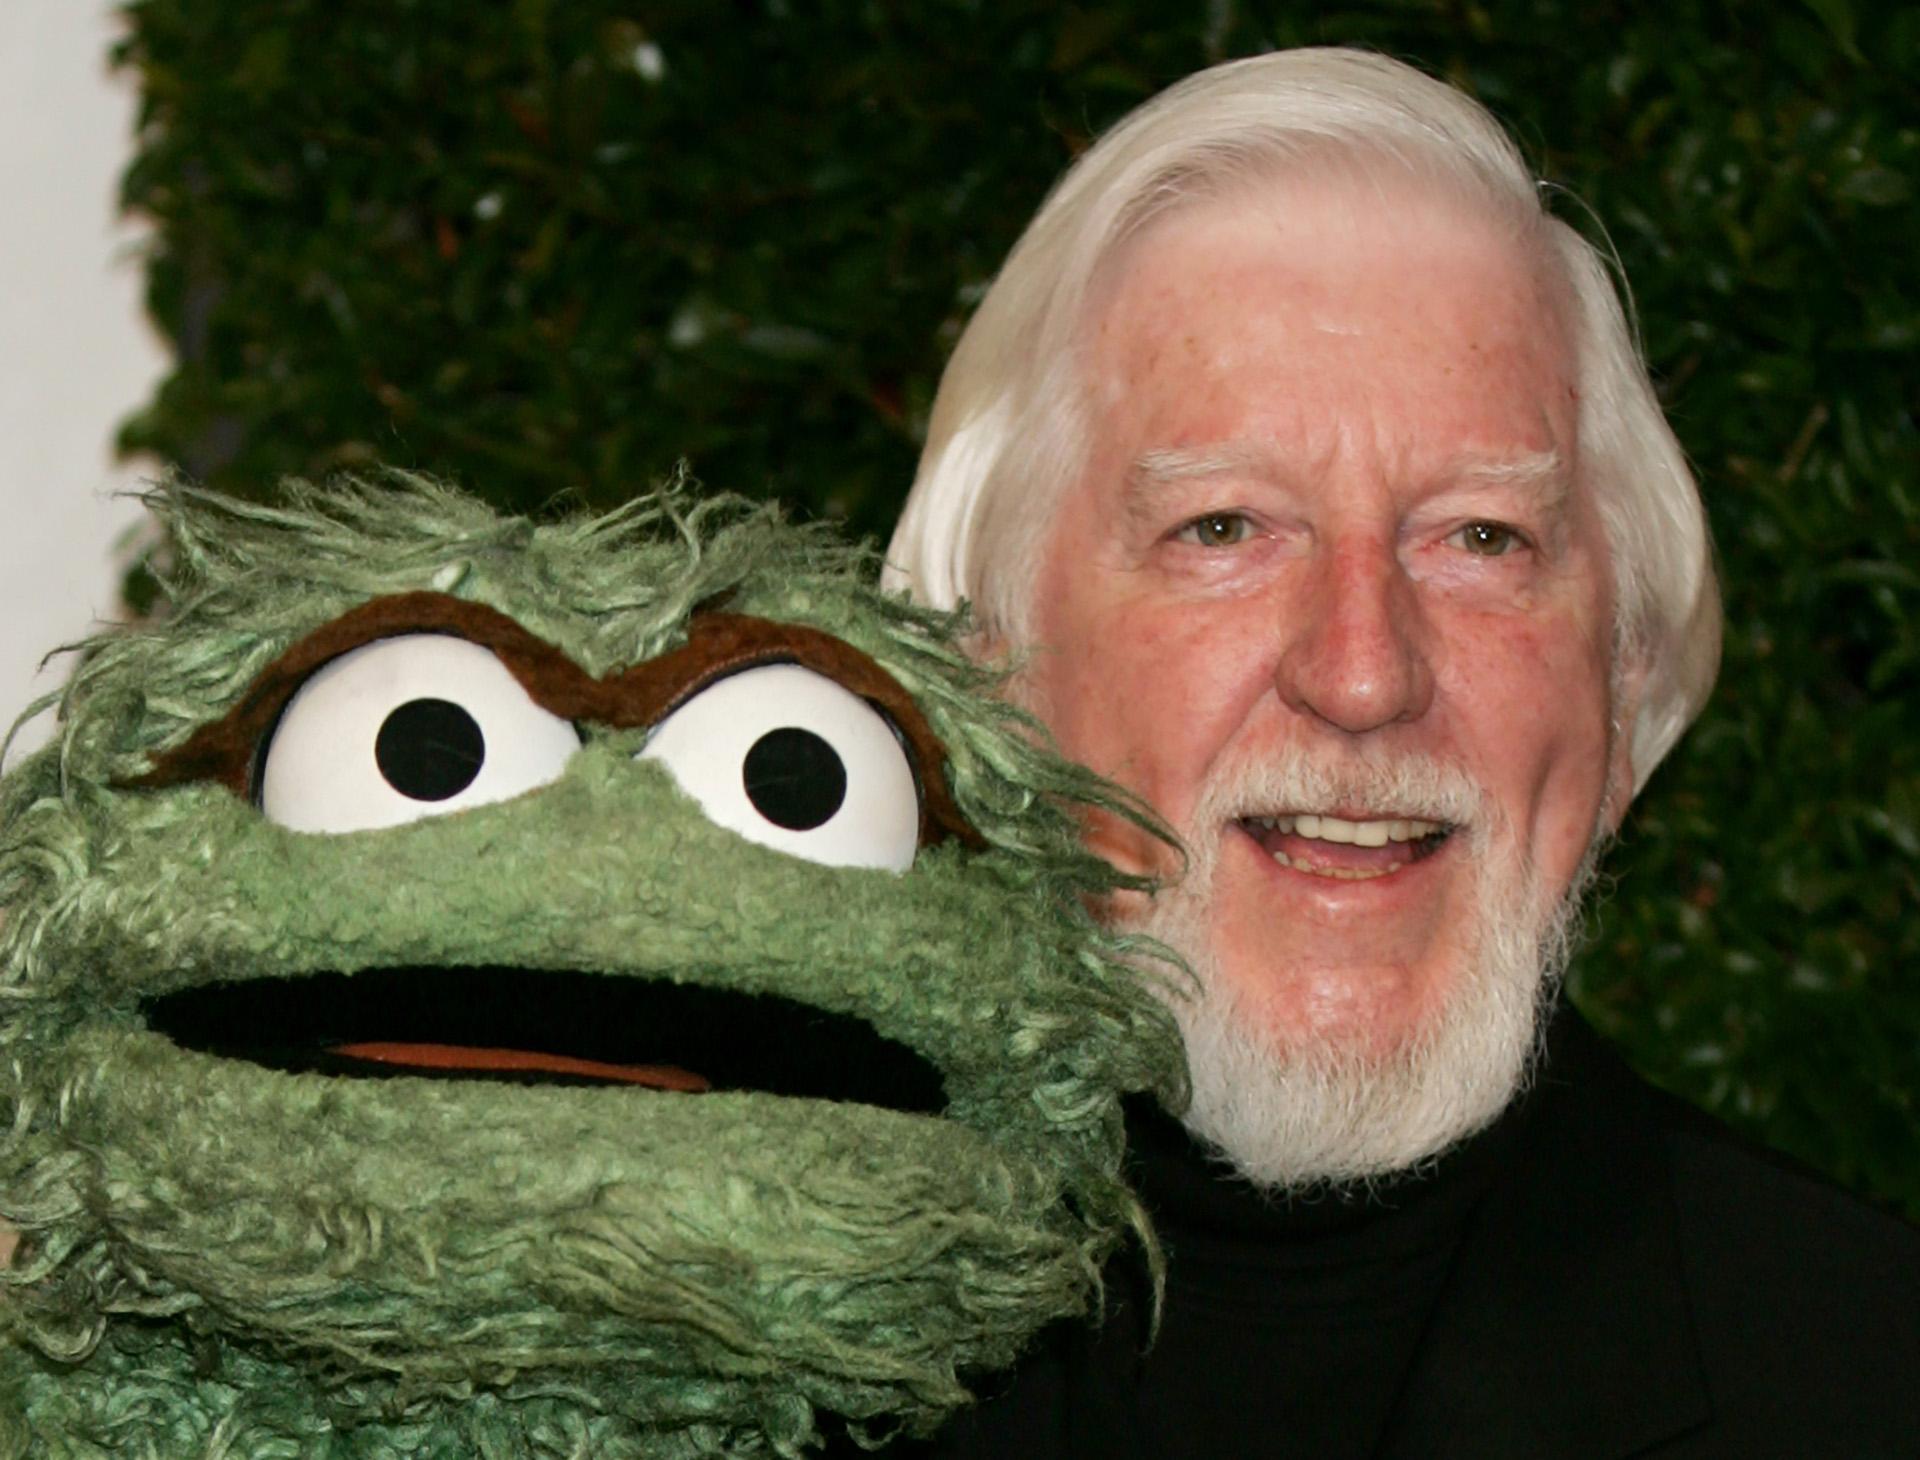 In this Thursday, April 27, 2006, file photo, Caroll Spinney, right, who portrays “Sesame Street” characters Oscar The Grouch, left, and Big Bird, arrives for the Daytime Emmy nominee party at the Hollywood Roosevelt Hotel in Los Angeles. (AP Photo / Reed Saxon, File)